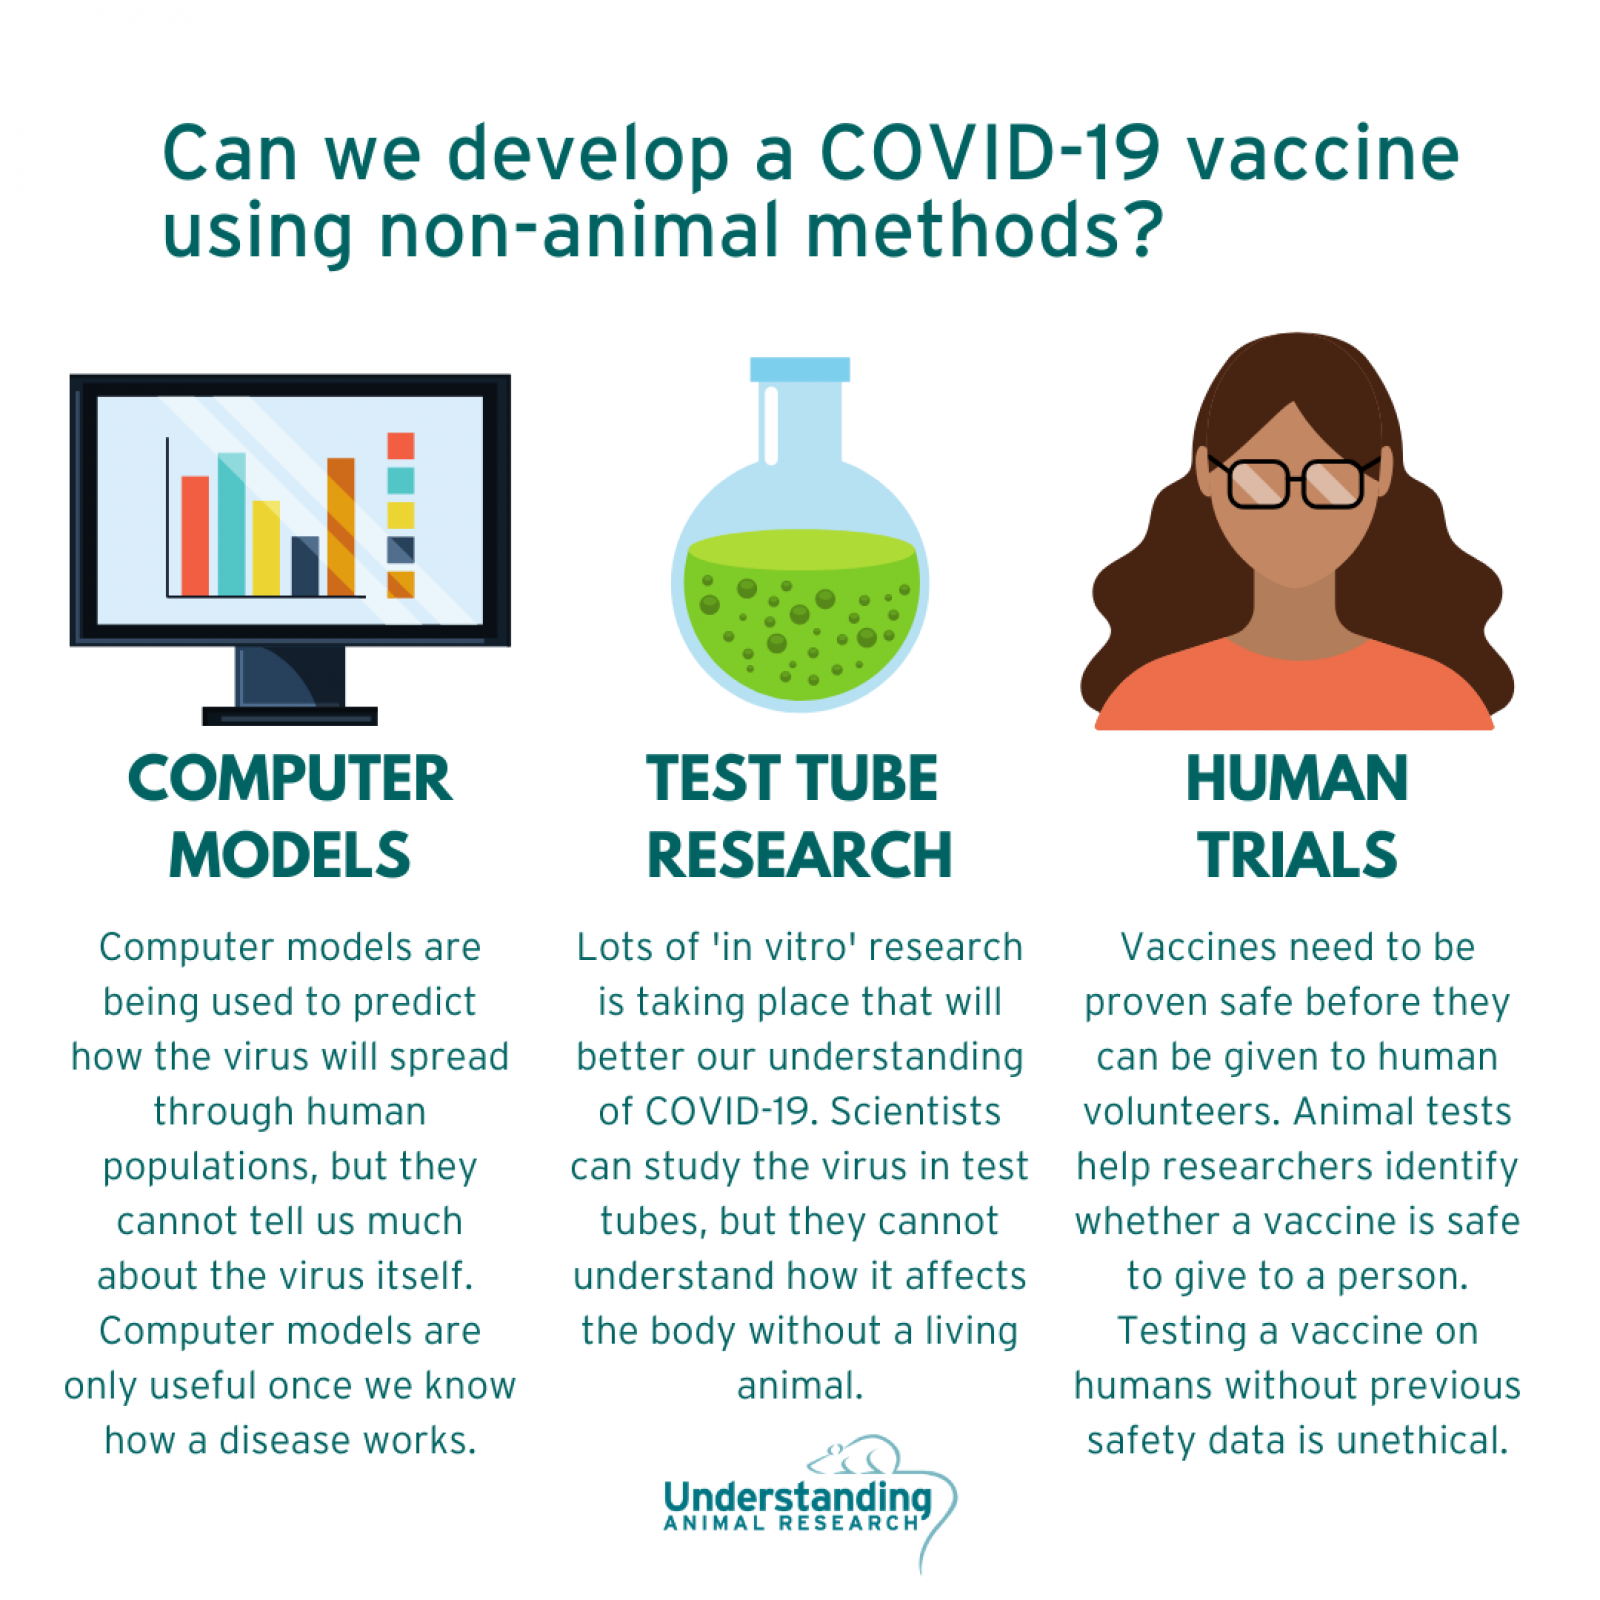 Can we develop a COVID vaccine with non-animal methods?